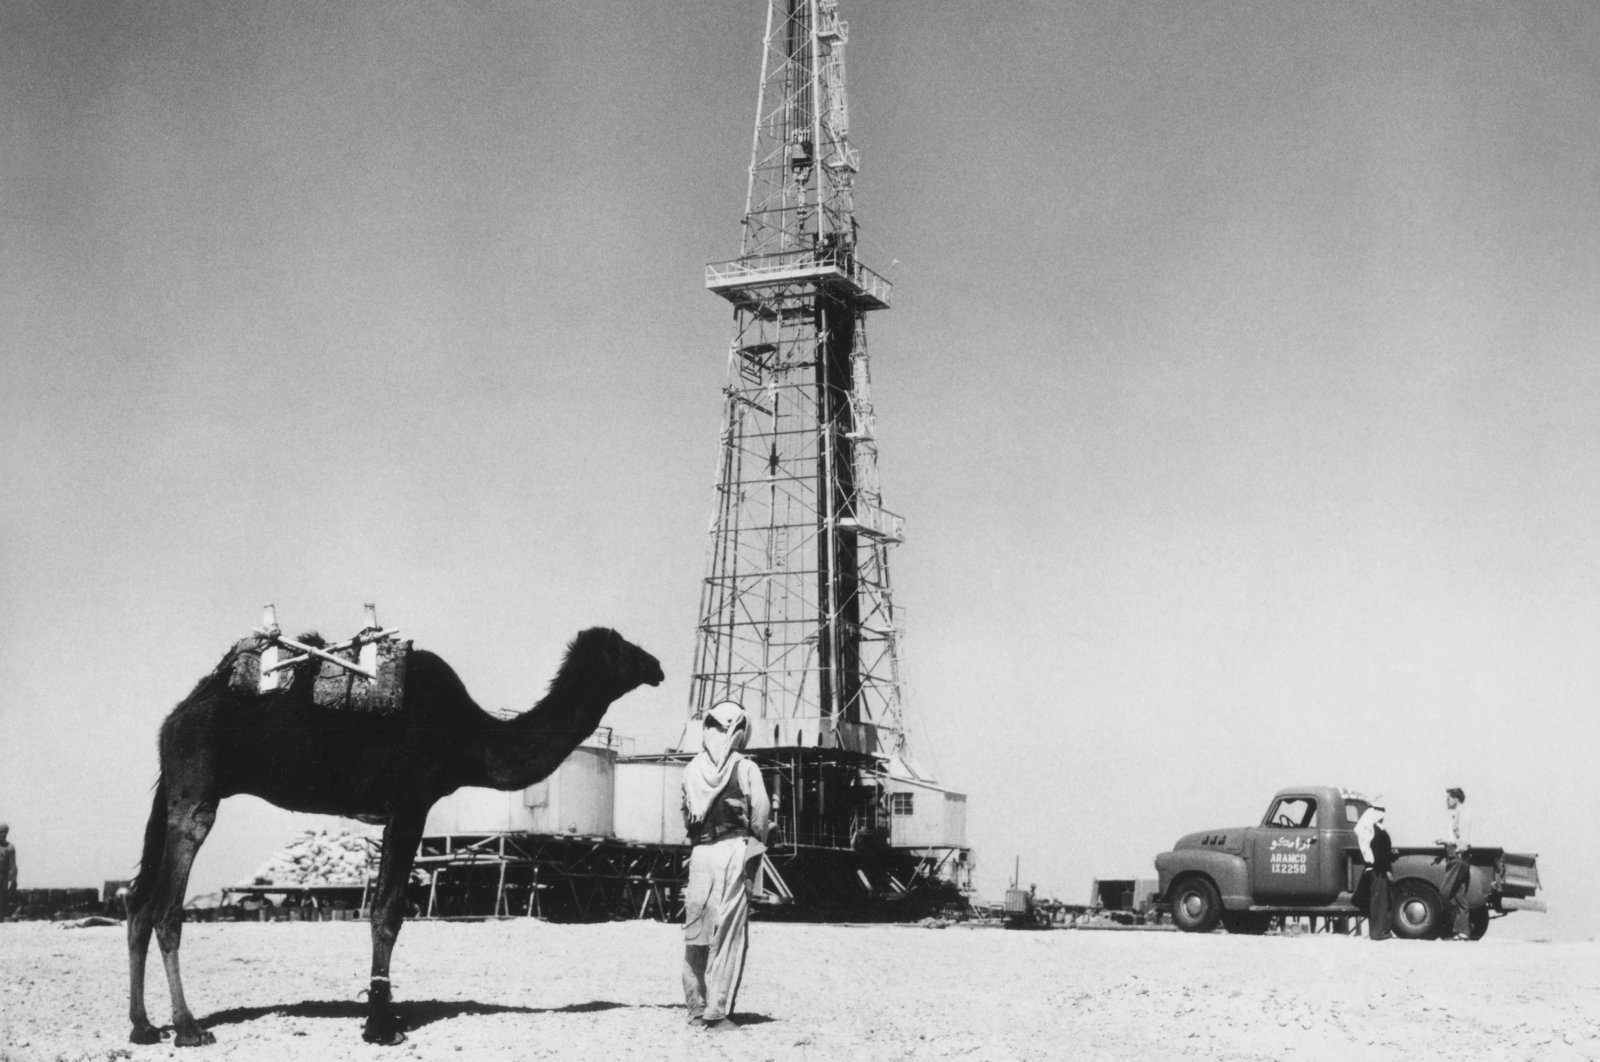 A man with his camel can be seen near an oil well in Saudi Arabia in the 1940s. (Getty Images)